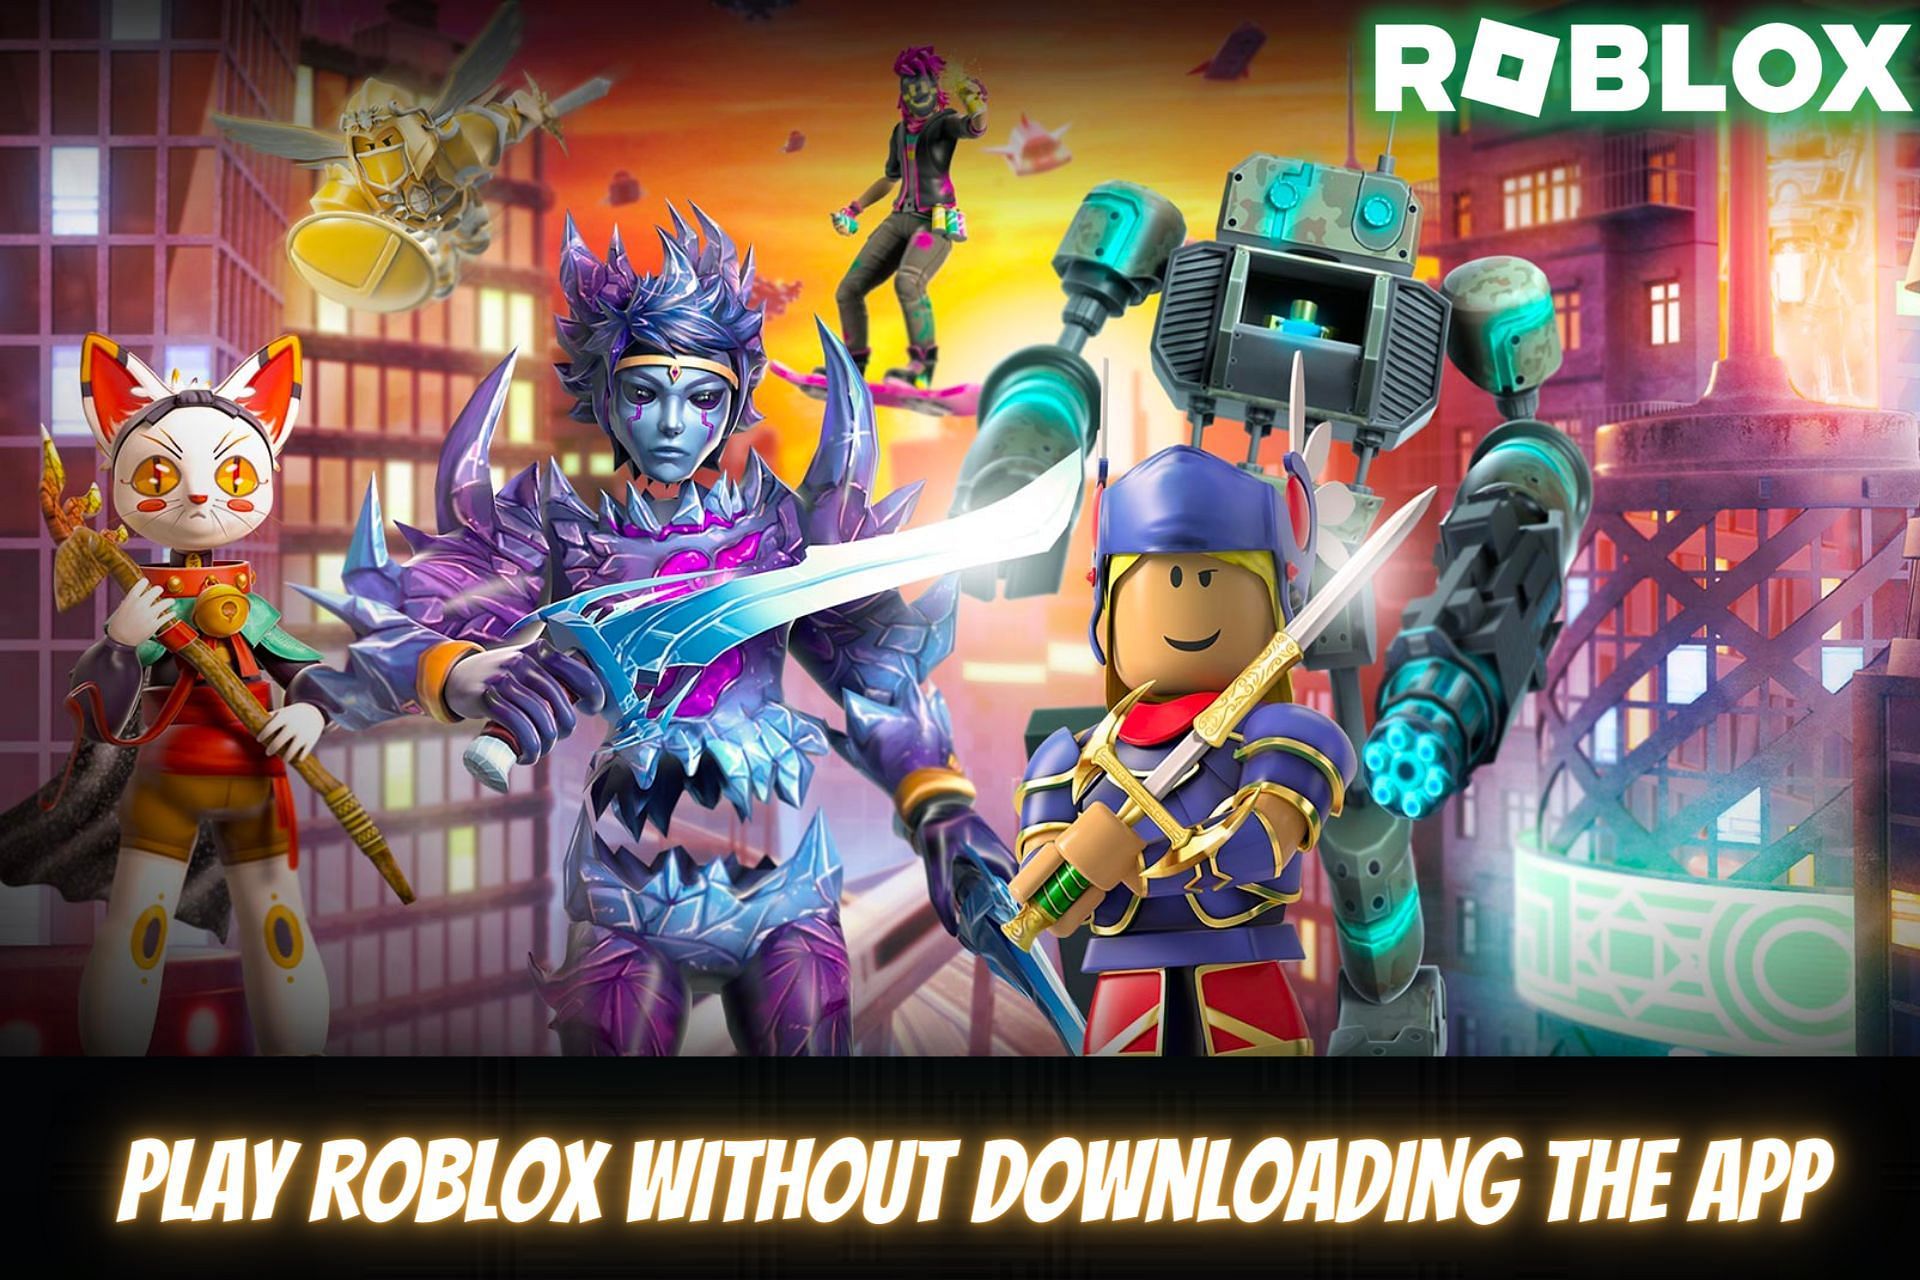 Roblox Download APK [Link] Install Roblox on PC/ Laptop/Mac/ Android/IOS